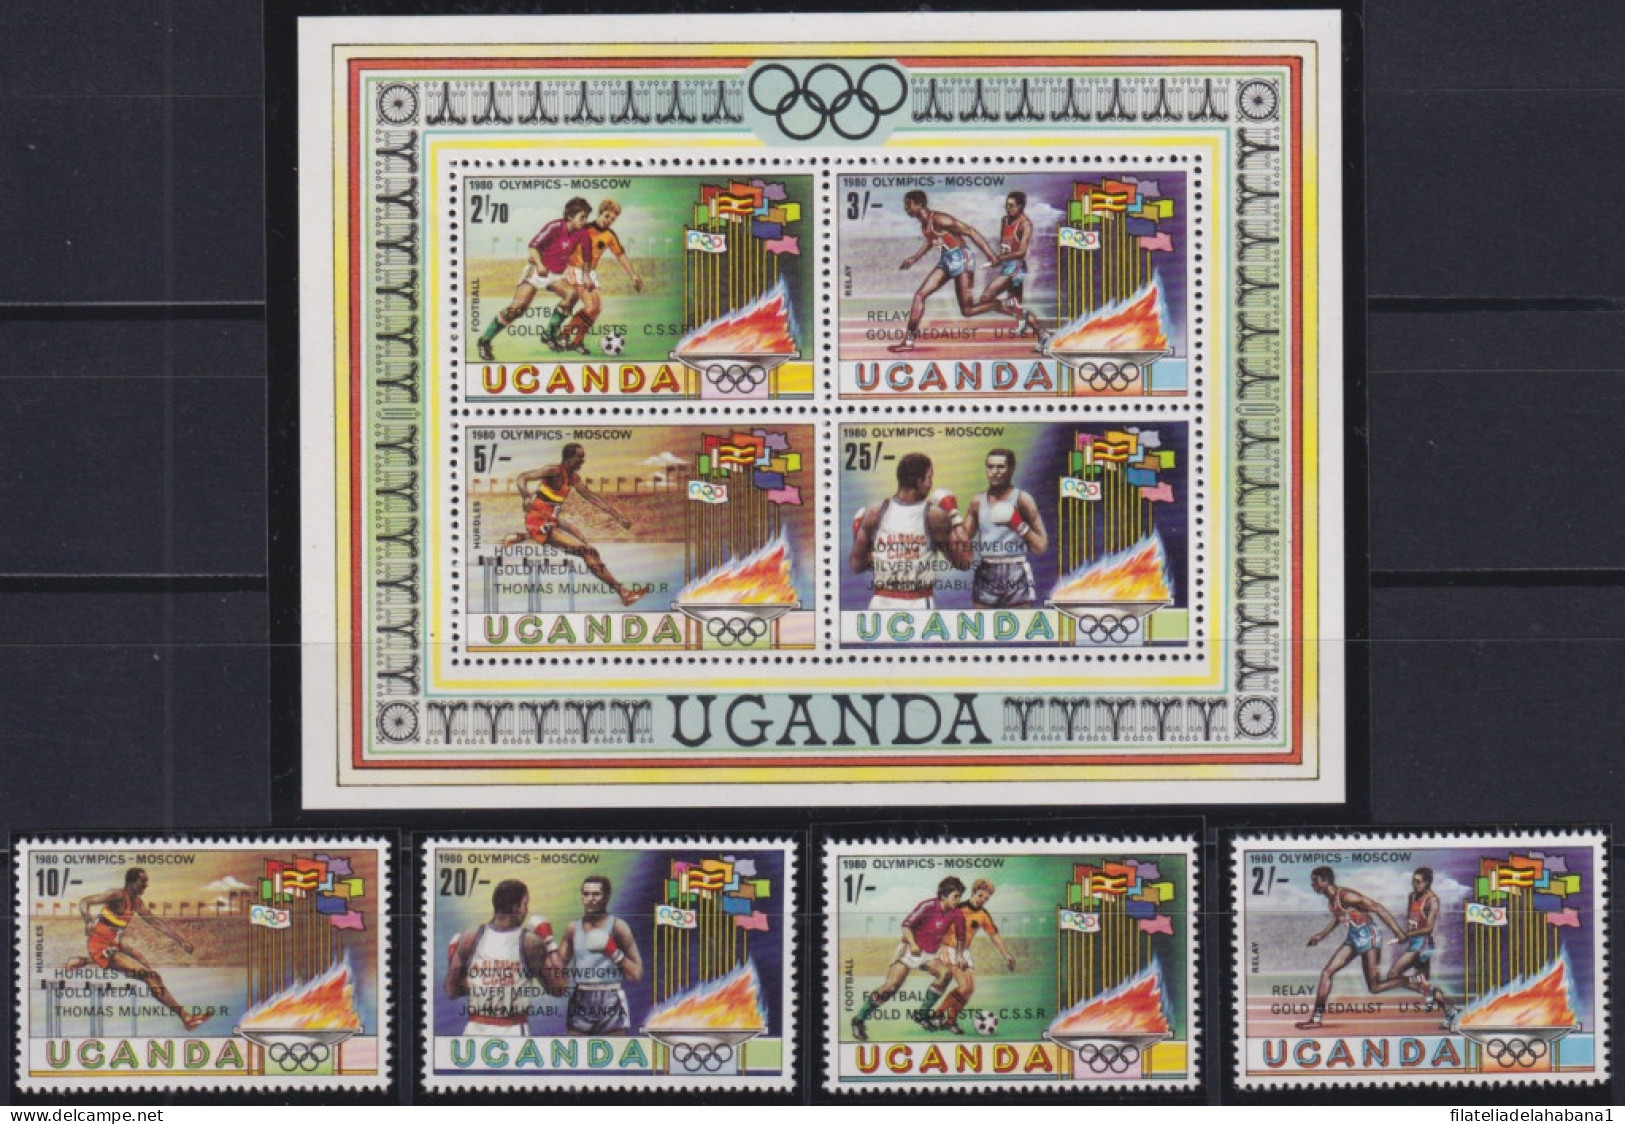 F-EX50254 UGANDA MNH 1980 OLYMPIC GAMES MOSCOW WINNER BOXING ATHLETISM SOCCER FOOTBALL.  - Ete 1980: Moscou